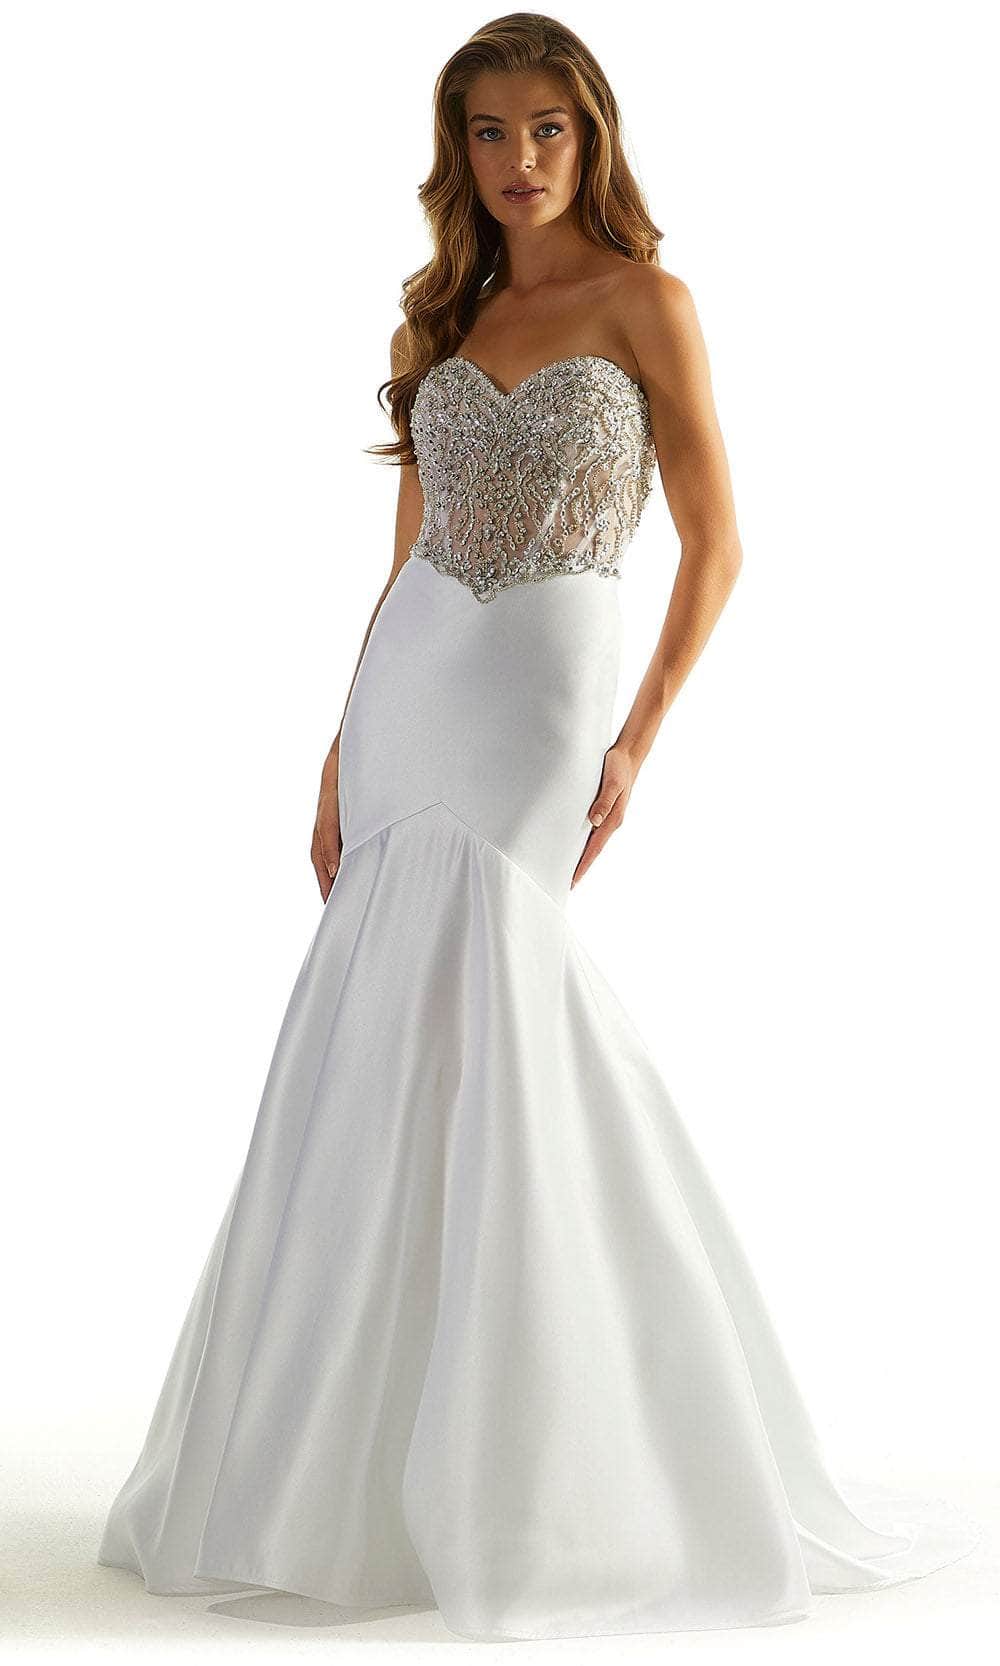 Image of Mori Lee 49090 - Rhinestone Embellished Strapless Prom Gown